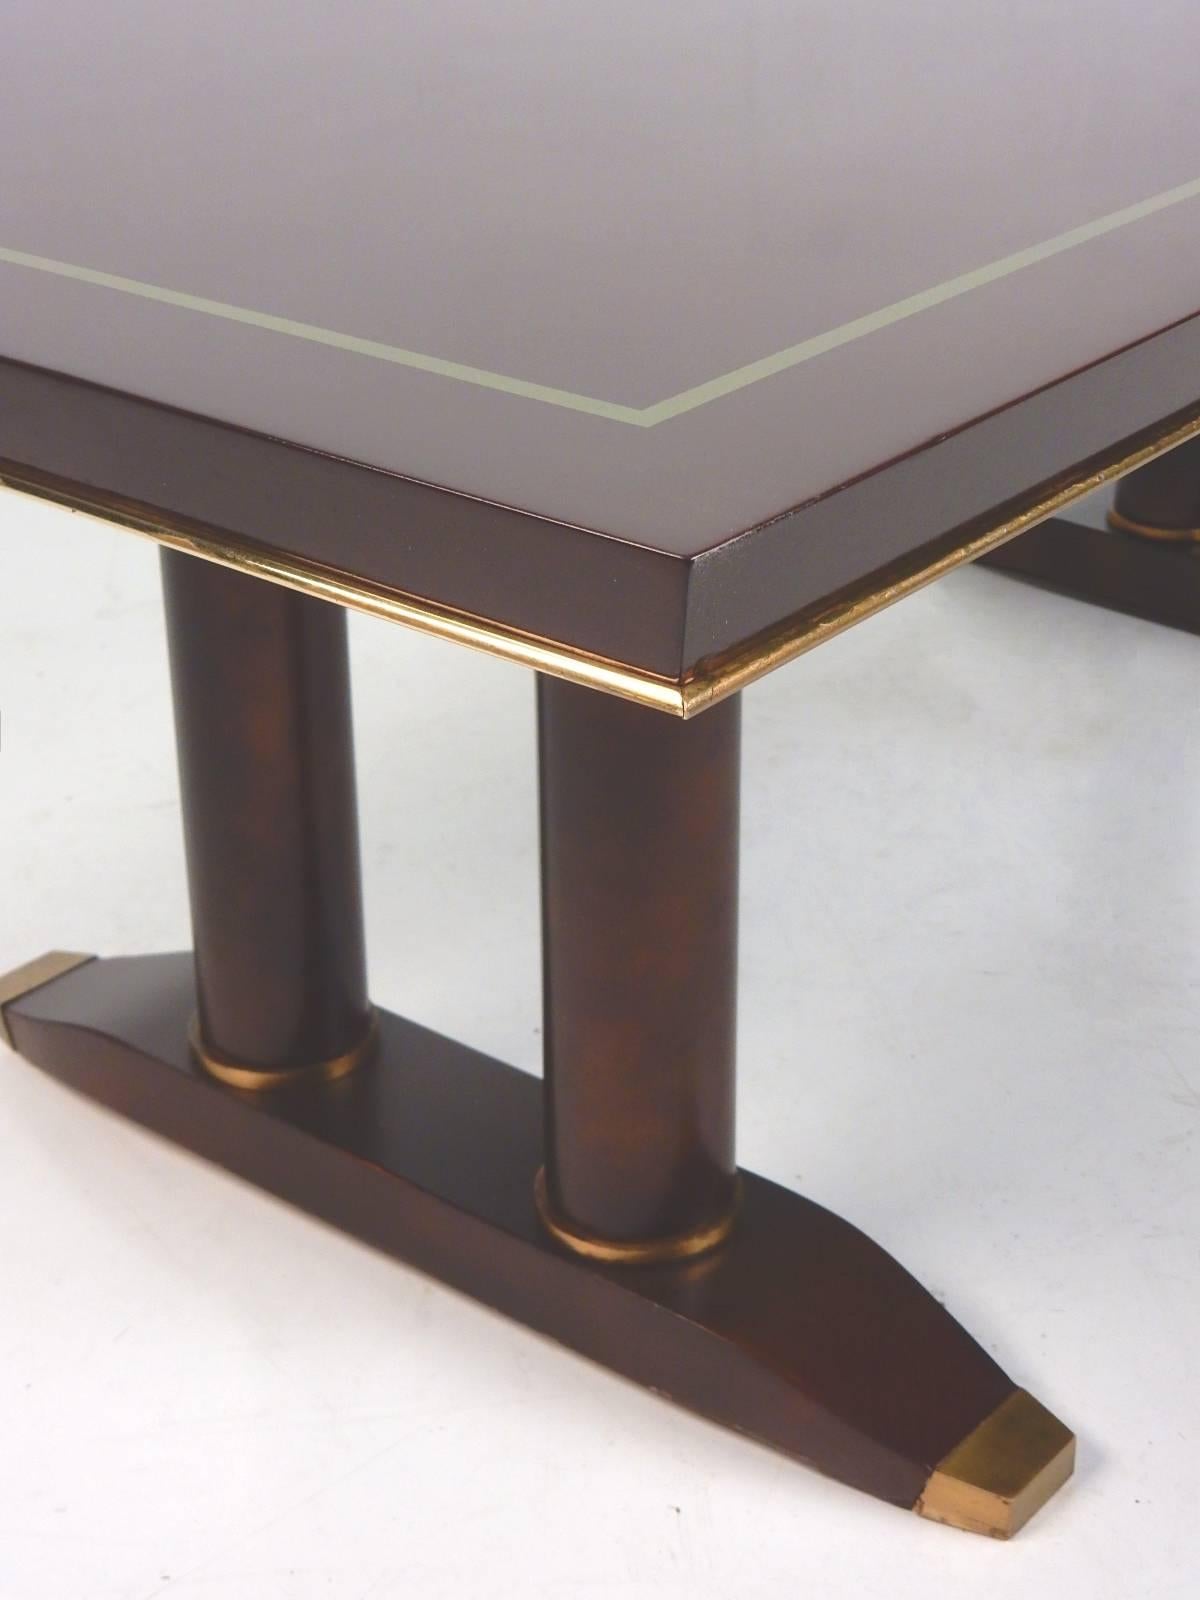 20th Century Art Deco French Lacquer Coffee Table by Designer Batistin Spade